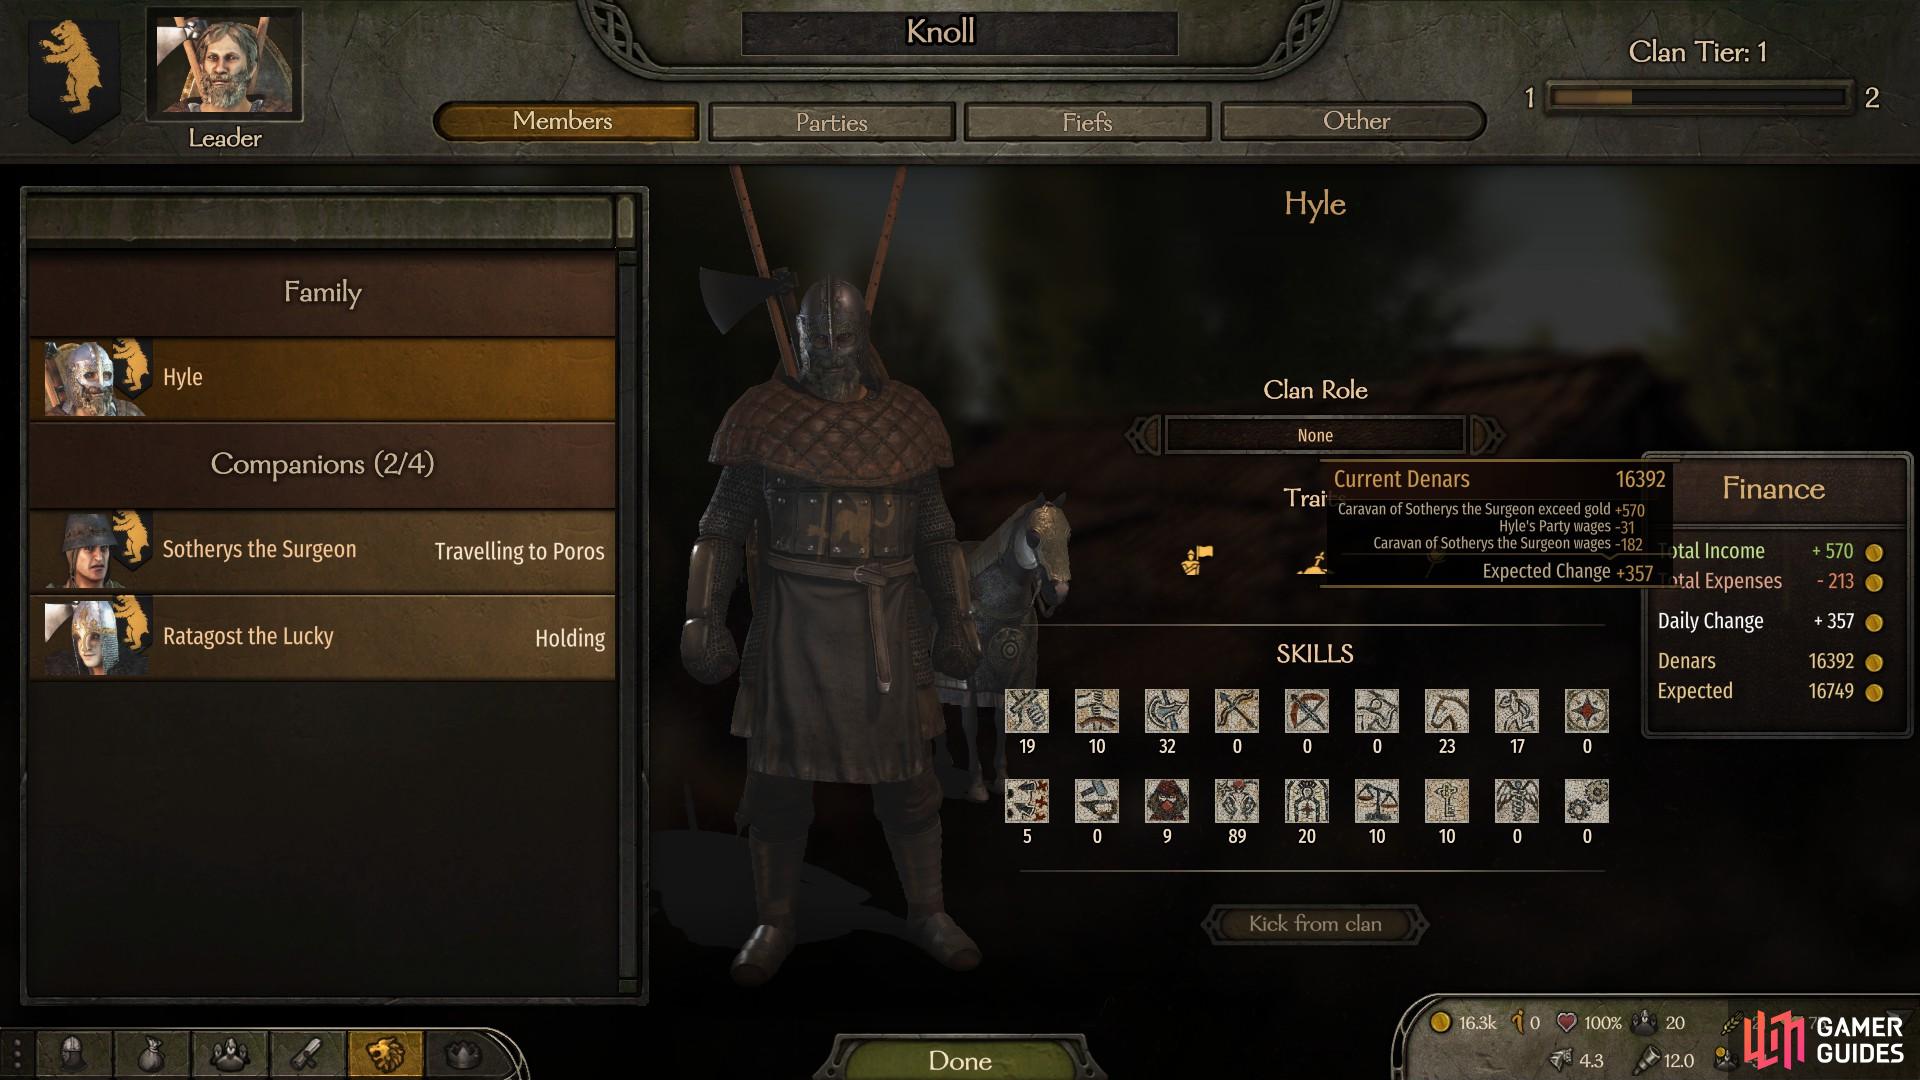 You can view the profits of your caravan in the Clan menu by hovering over 'Finance'. 